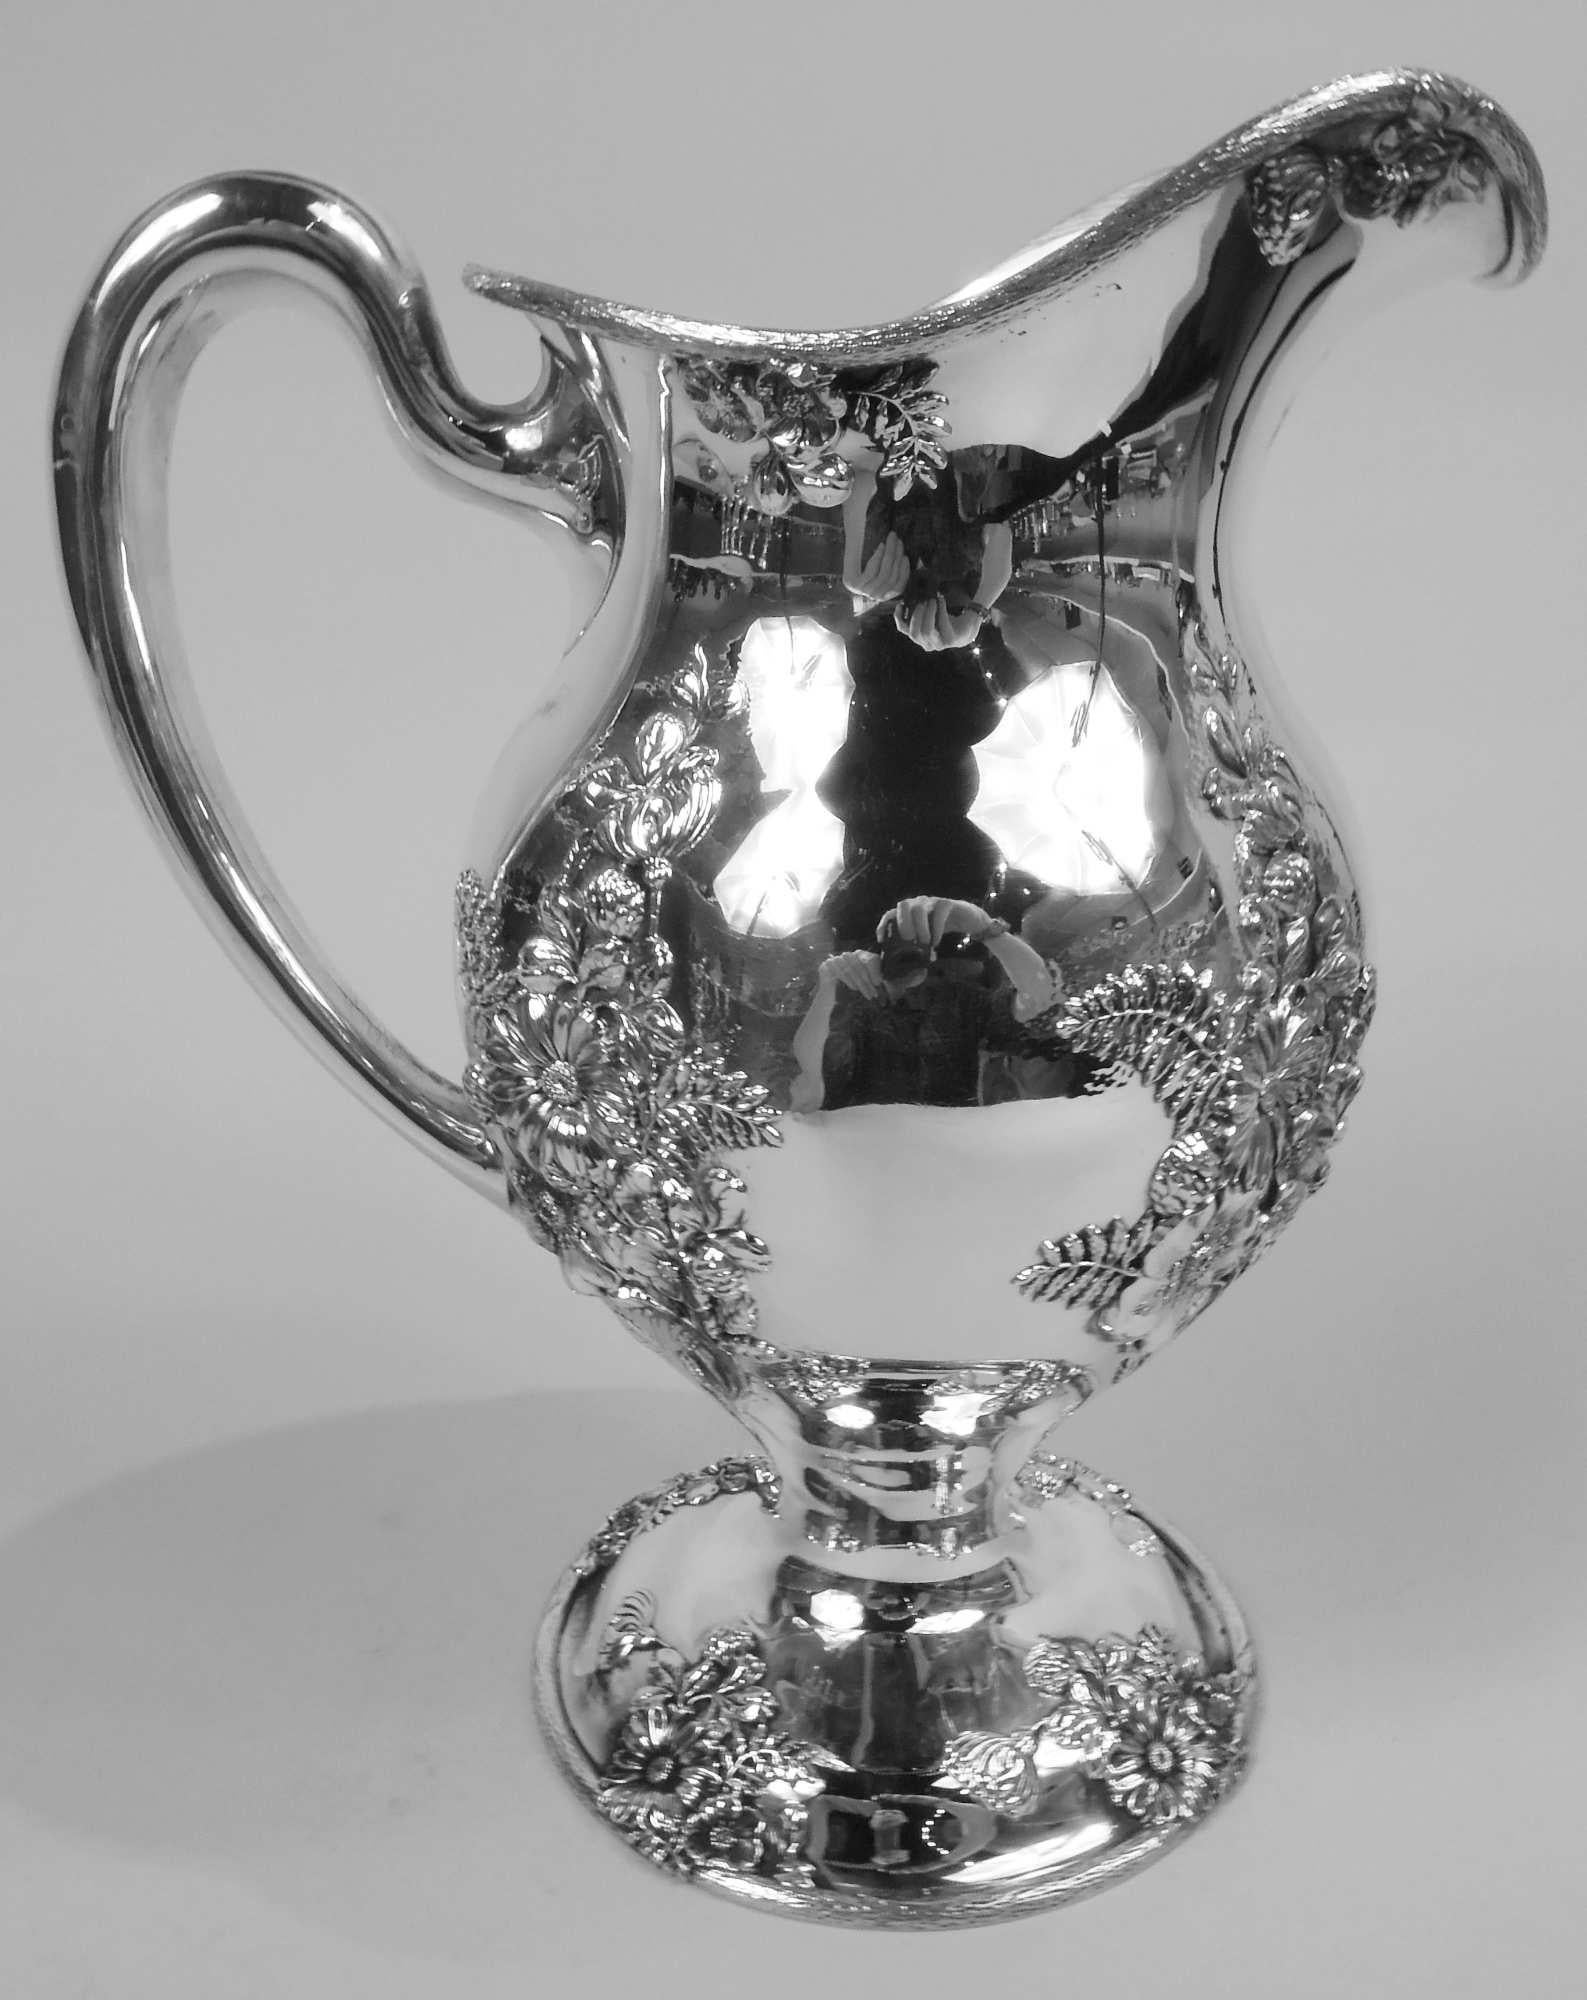 Fresh and Pretty American Art Nouveau sterling silver water pitcher, ca 1910. Retailed by Udall & Ballou in New York. Lobed and ovoid body with helmet mouth, domed foot, and high-looping handle. Applied and chased flower and frond clusters on body